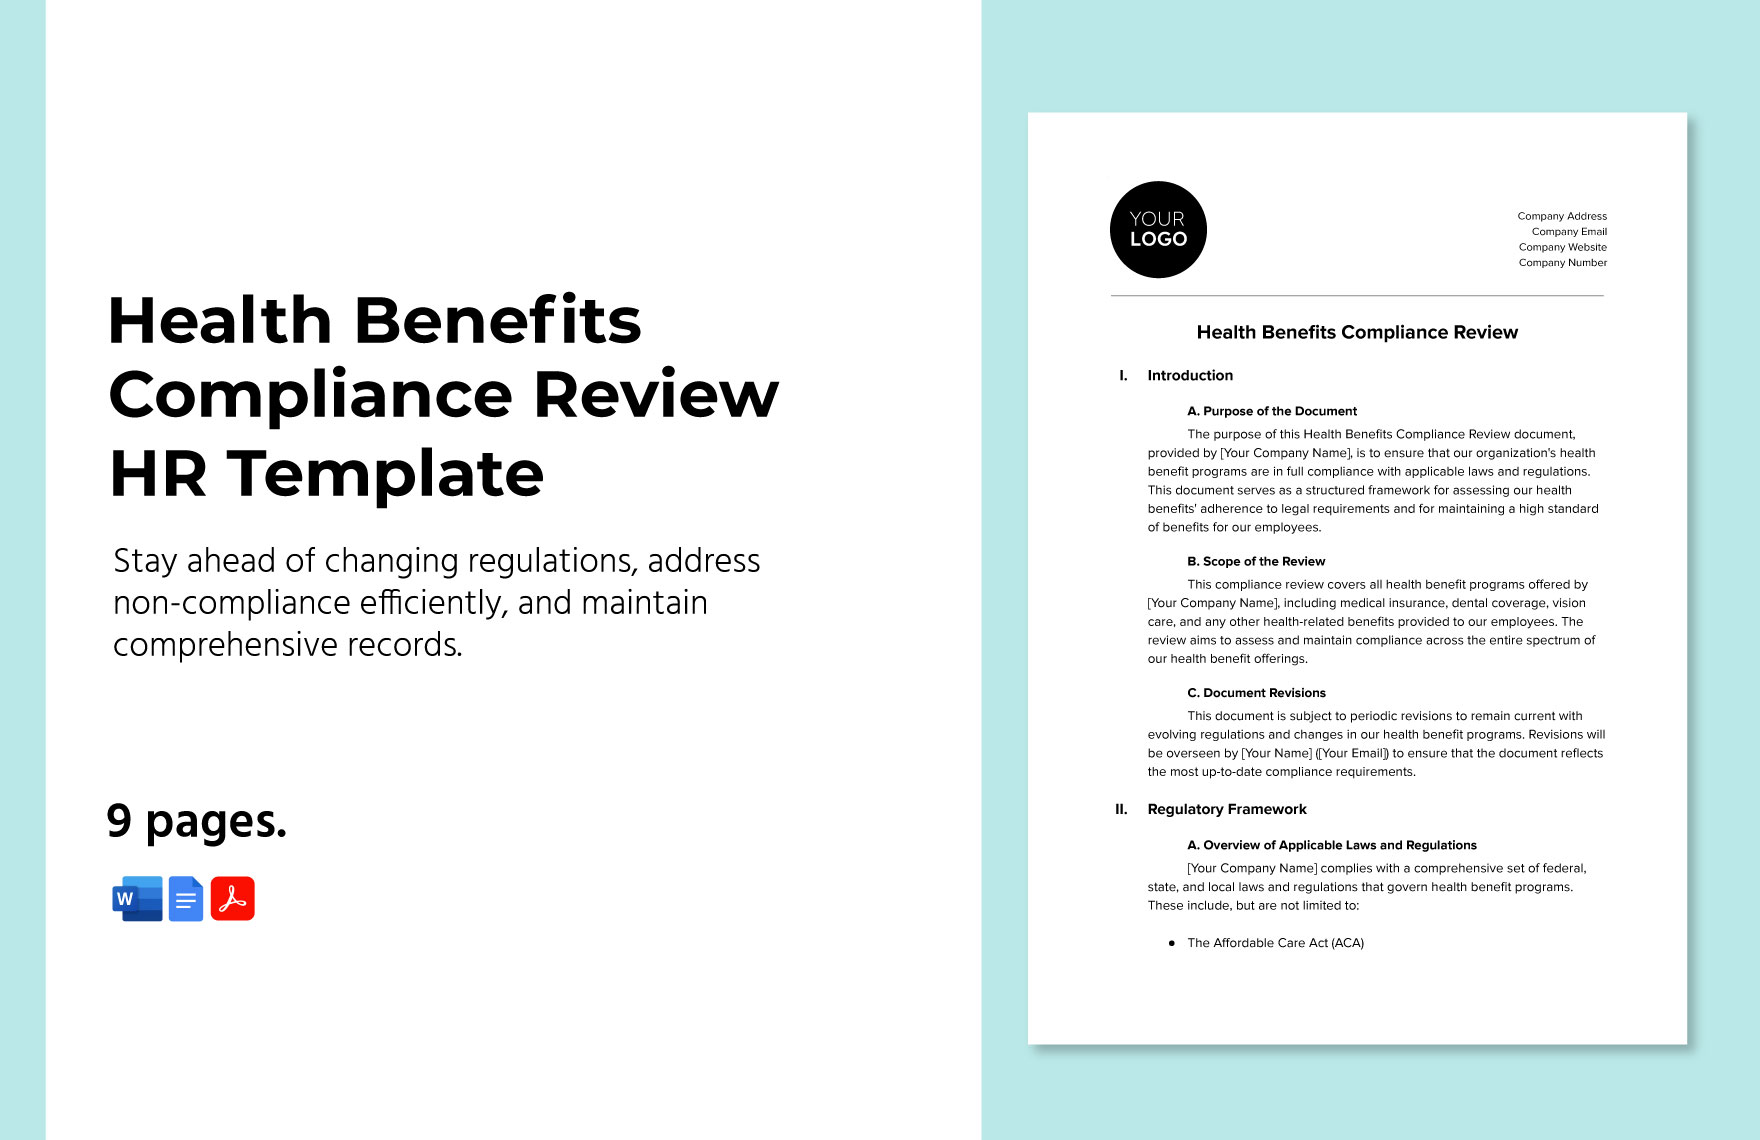 Health Benefits Compliance Review HR Template in Word, Google Docs, PDF